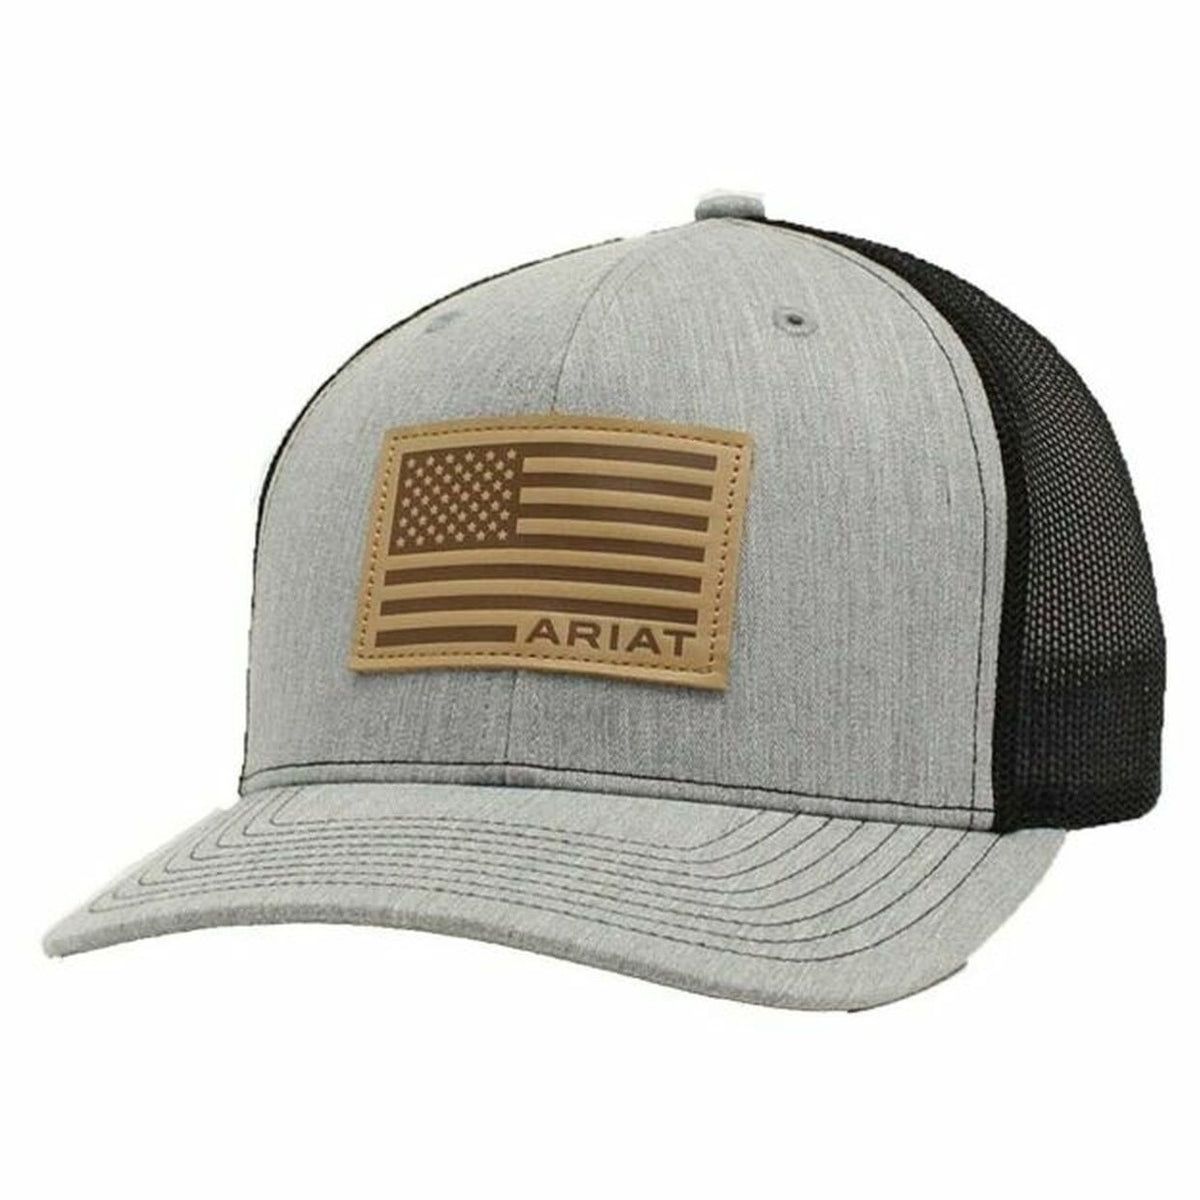 Ariat Men's Leather USA Flag Patch Trucker Cap in Grey/Black